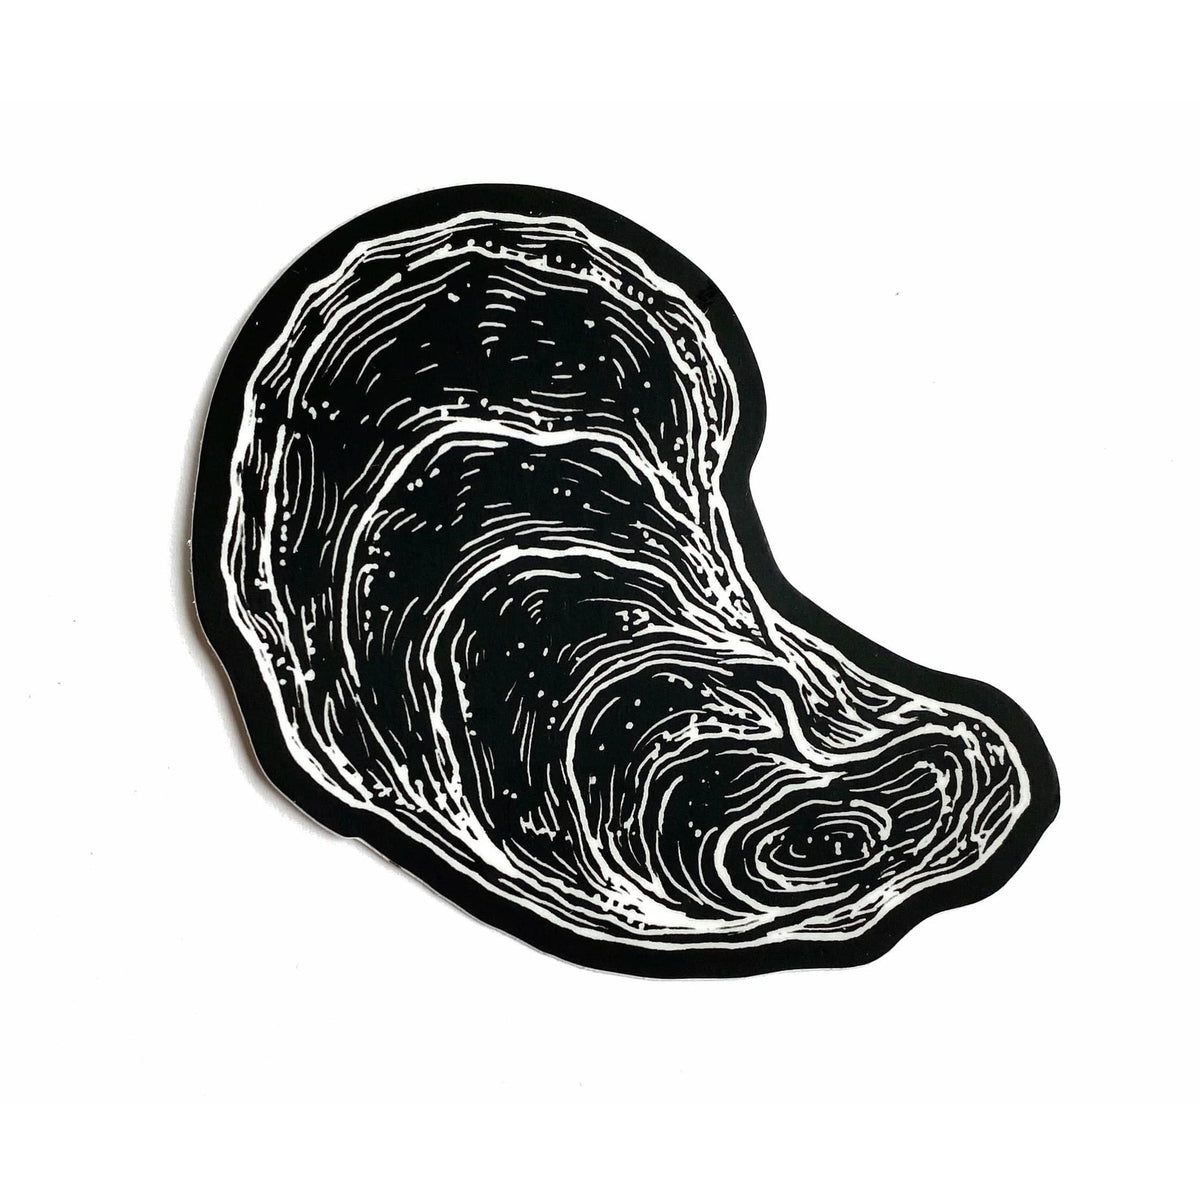 A black and white drawing of an Oyster Sticker by The Wild Wander.